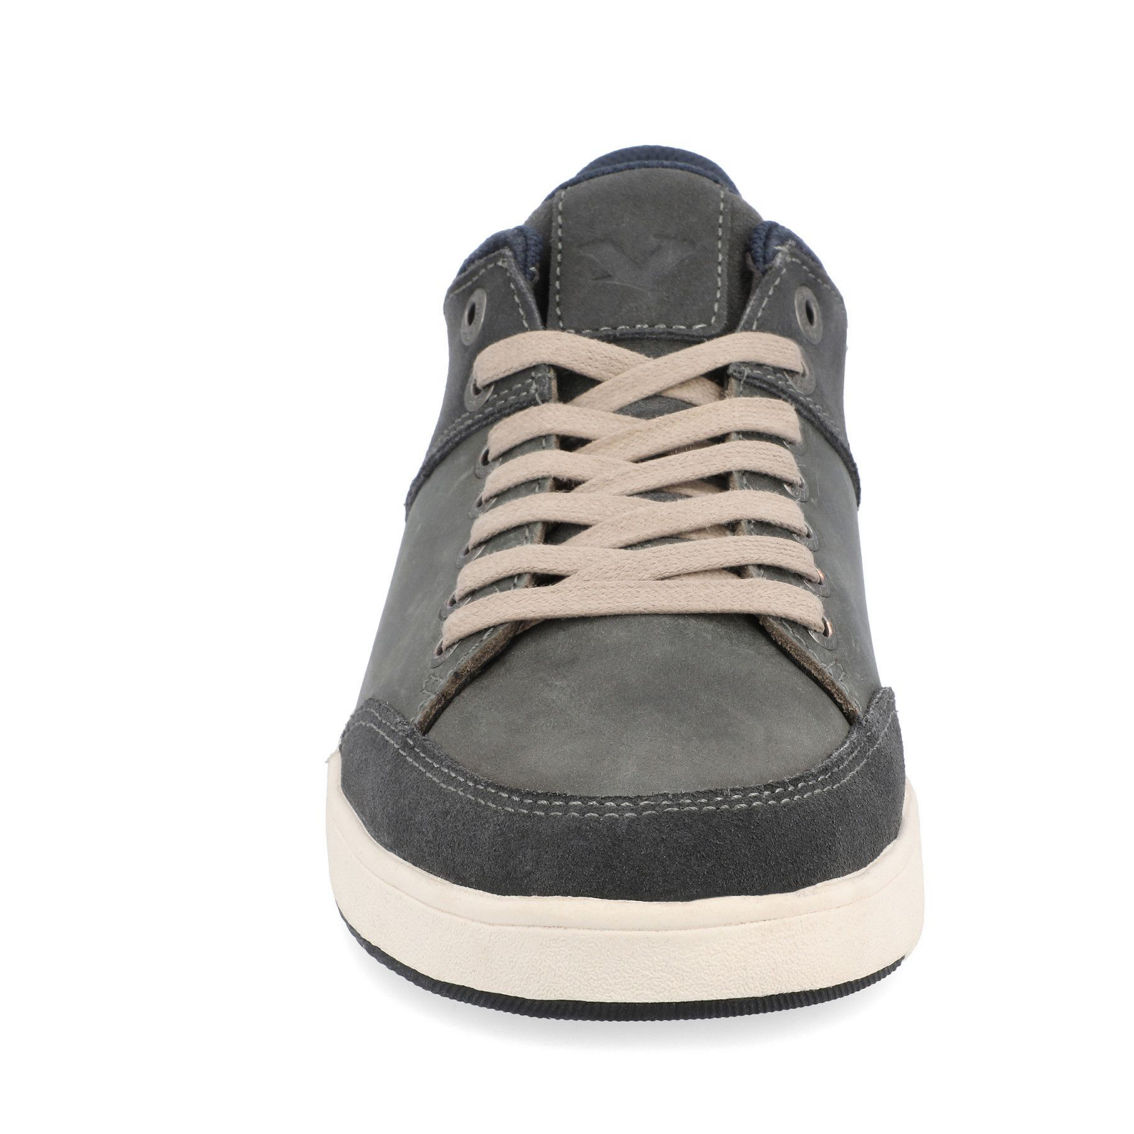 Territory Pacer Casual Leather Sneaker - Image 2 of 4